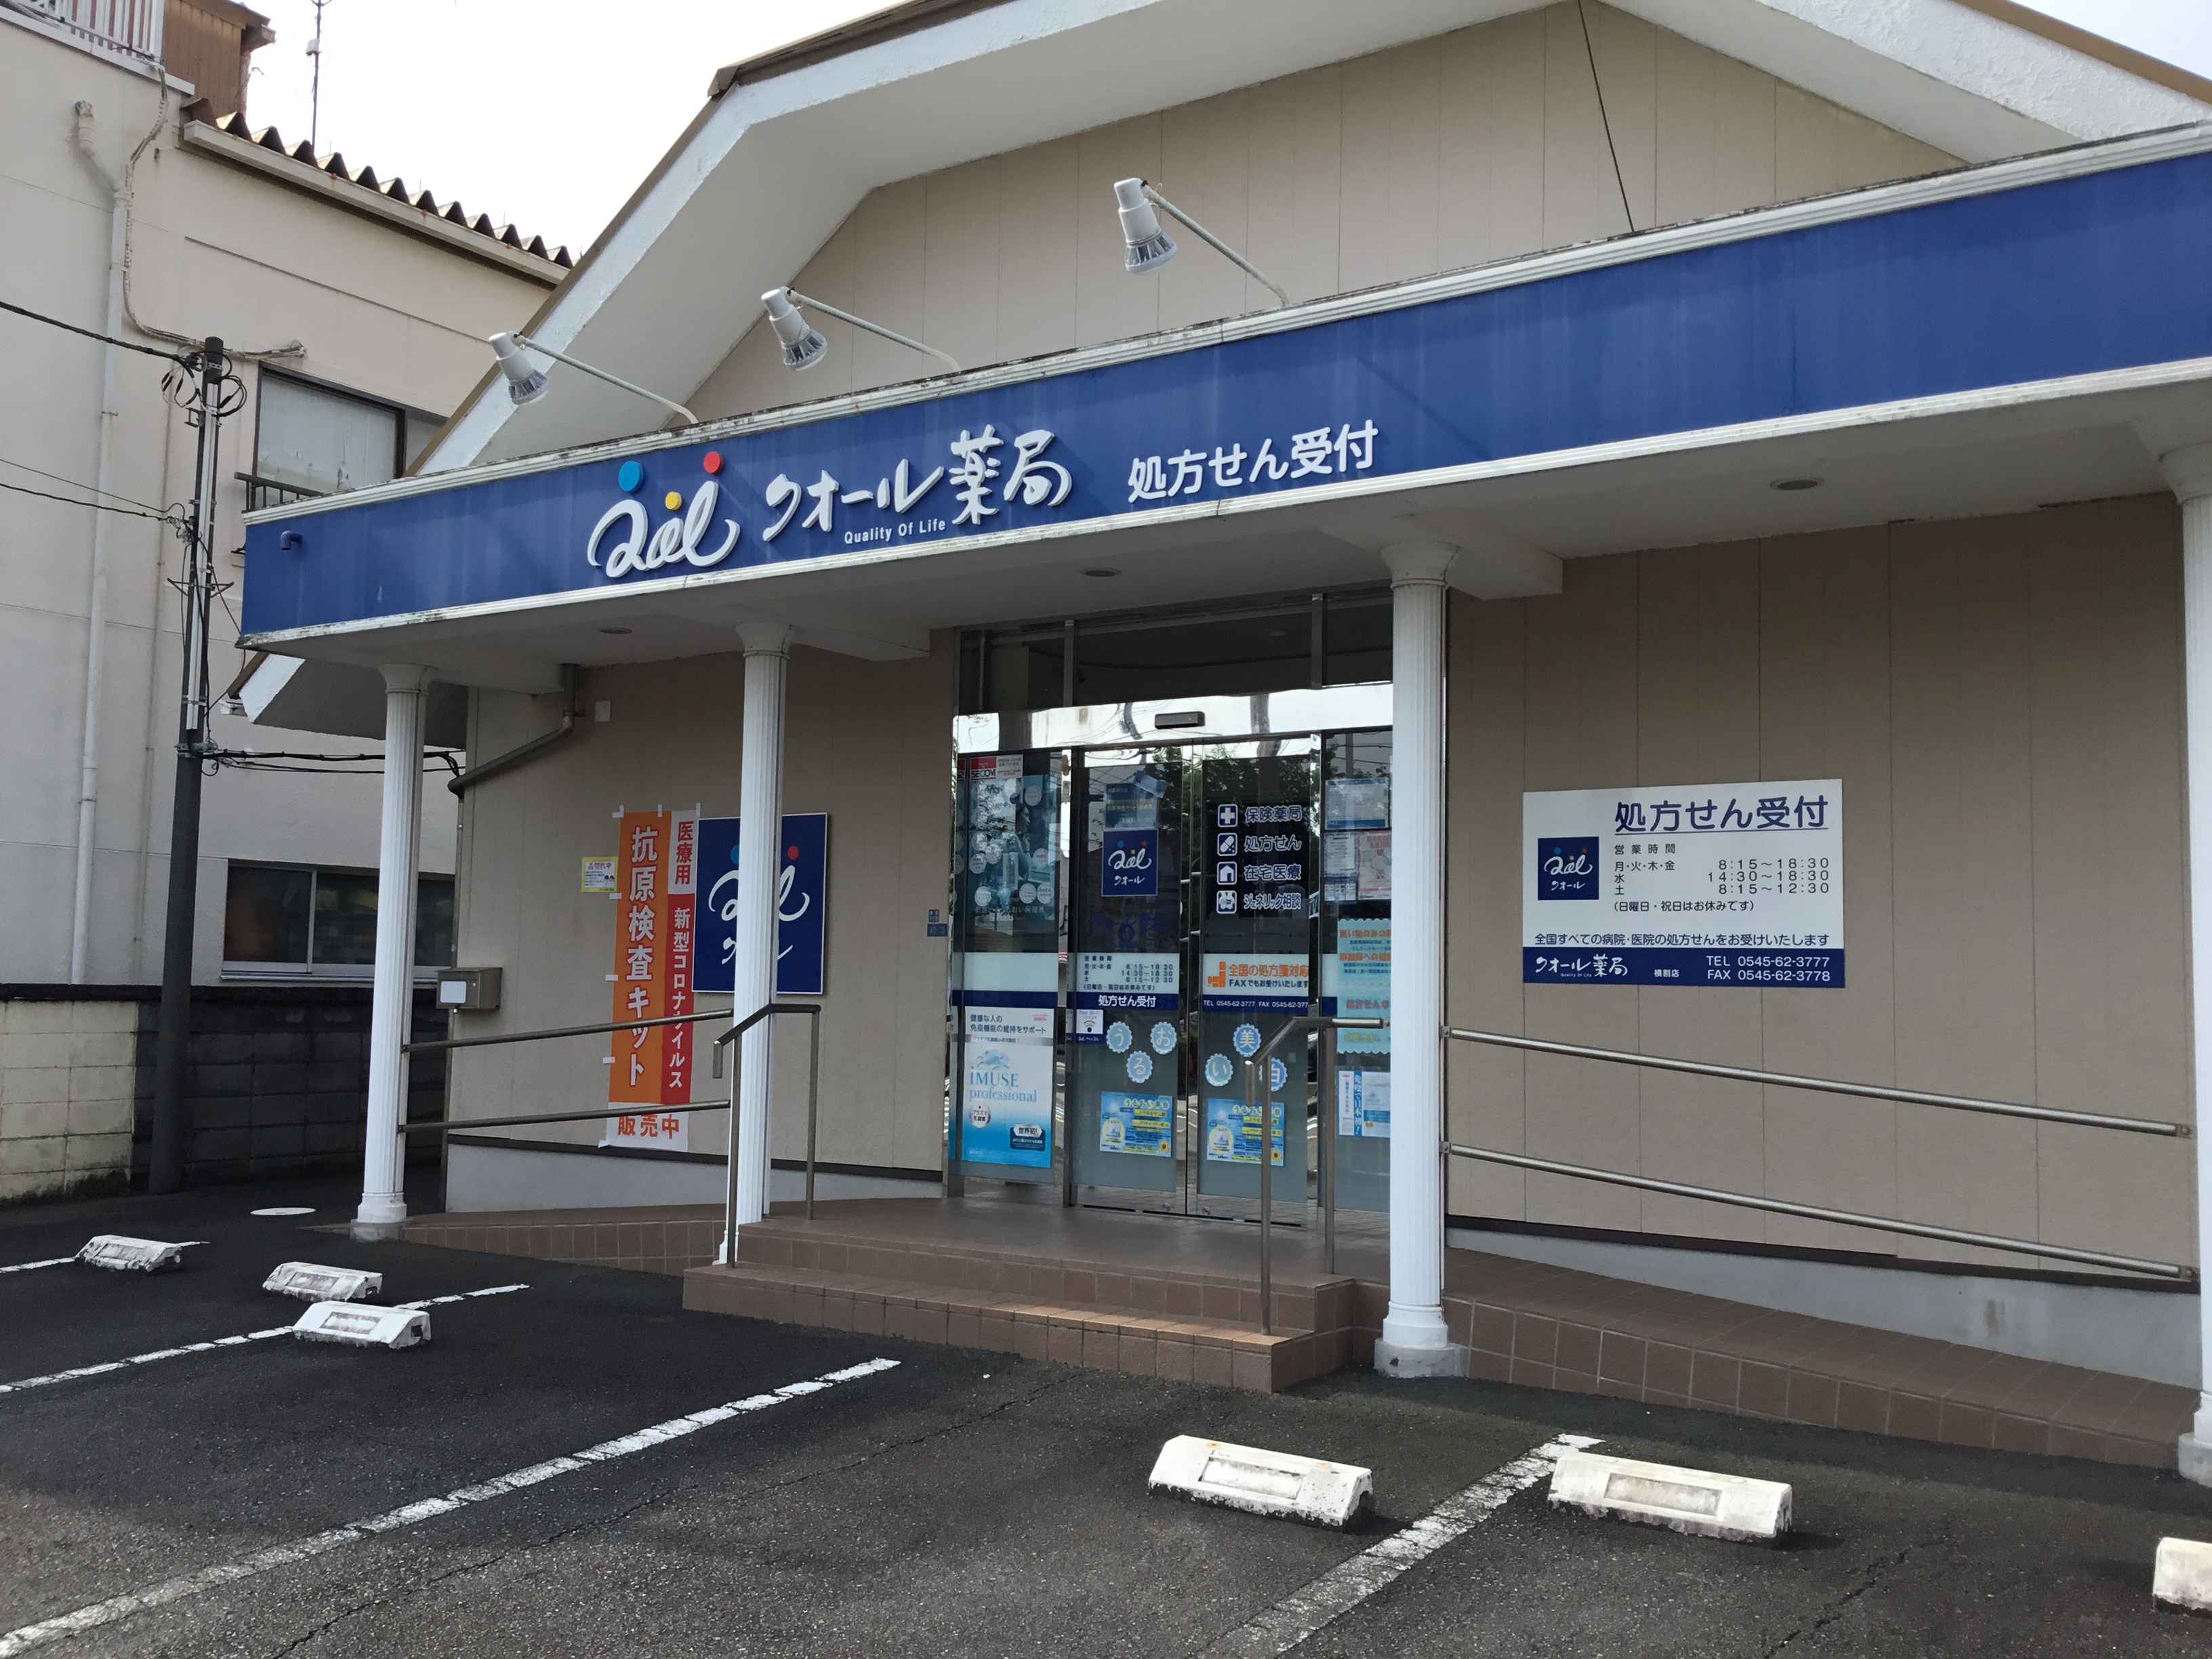 Images クオール薬局横割店